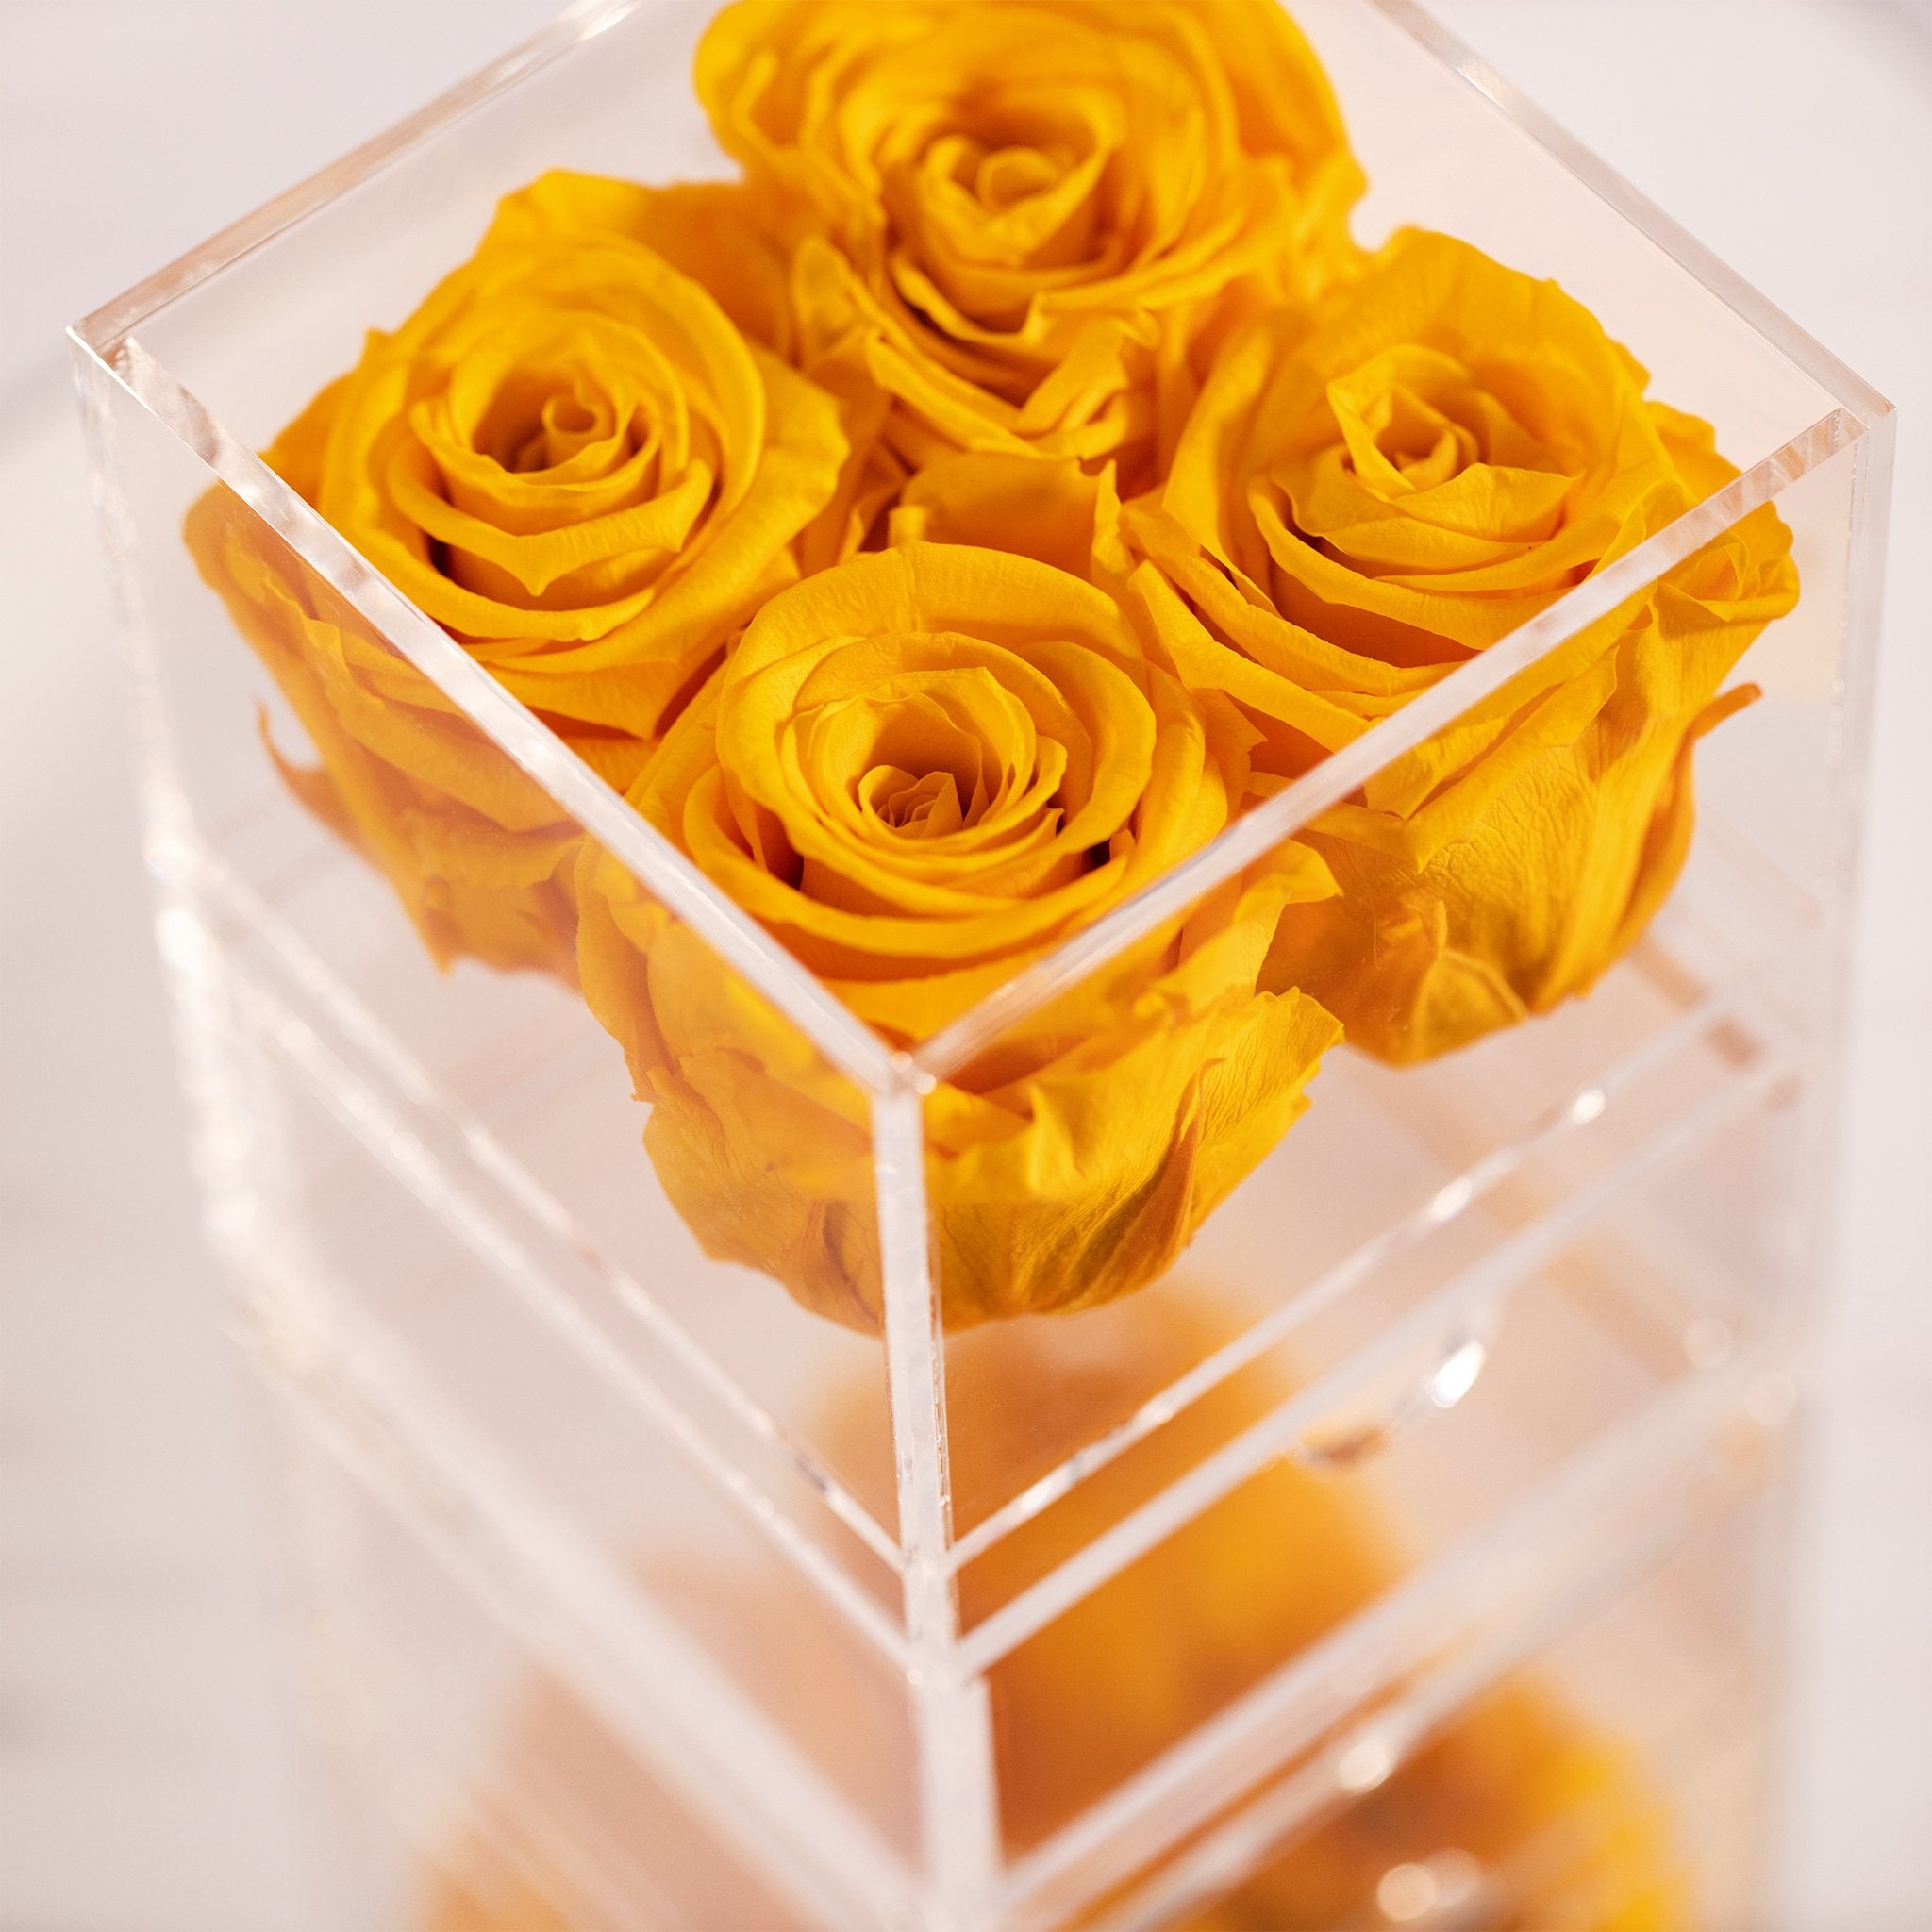 Stunning yellow roses implying happiness and joy 